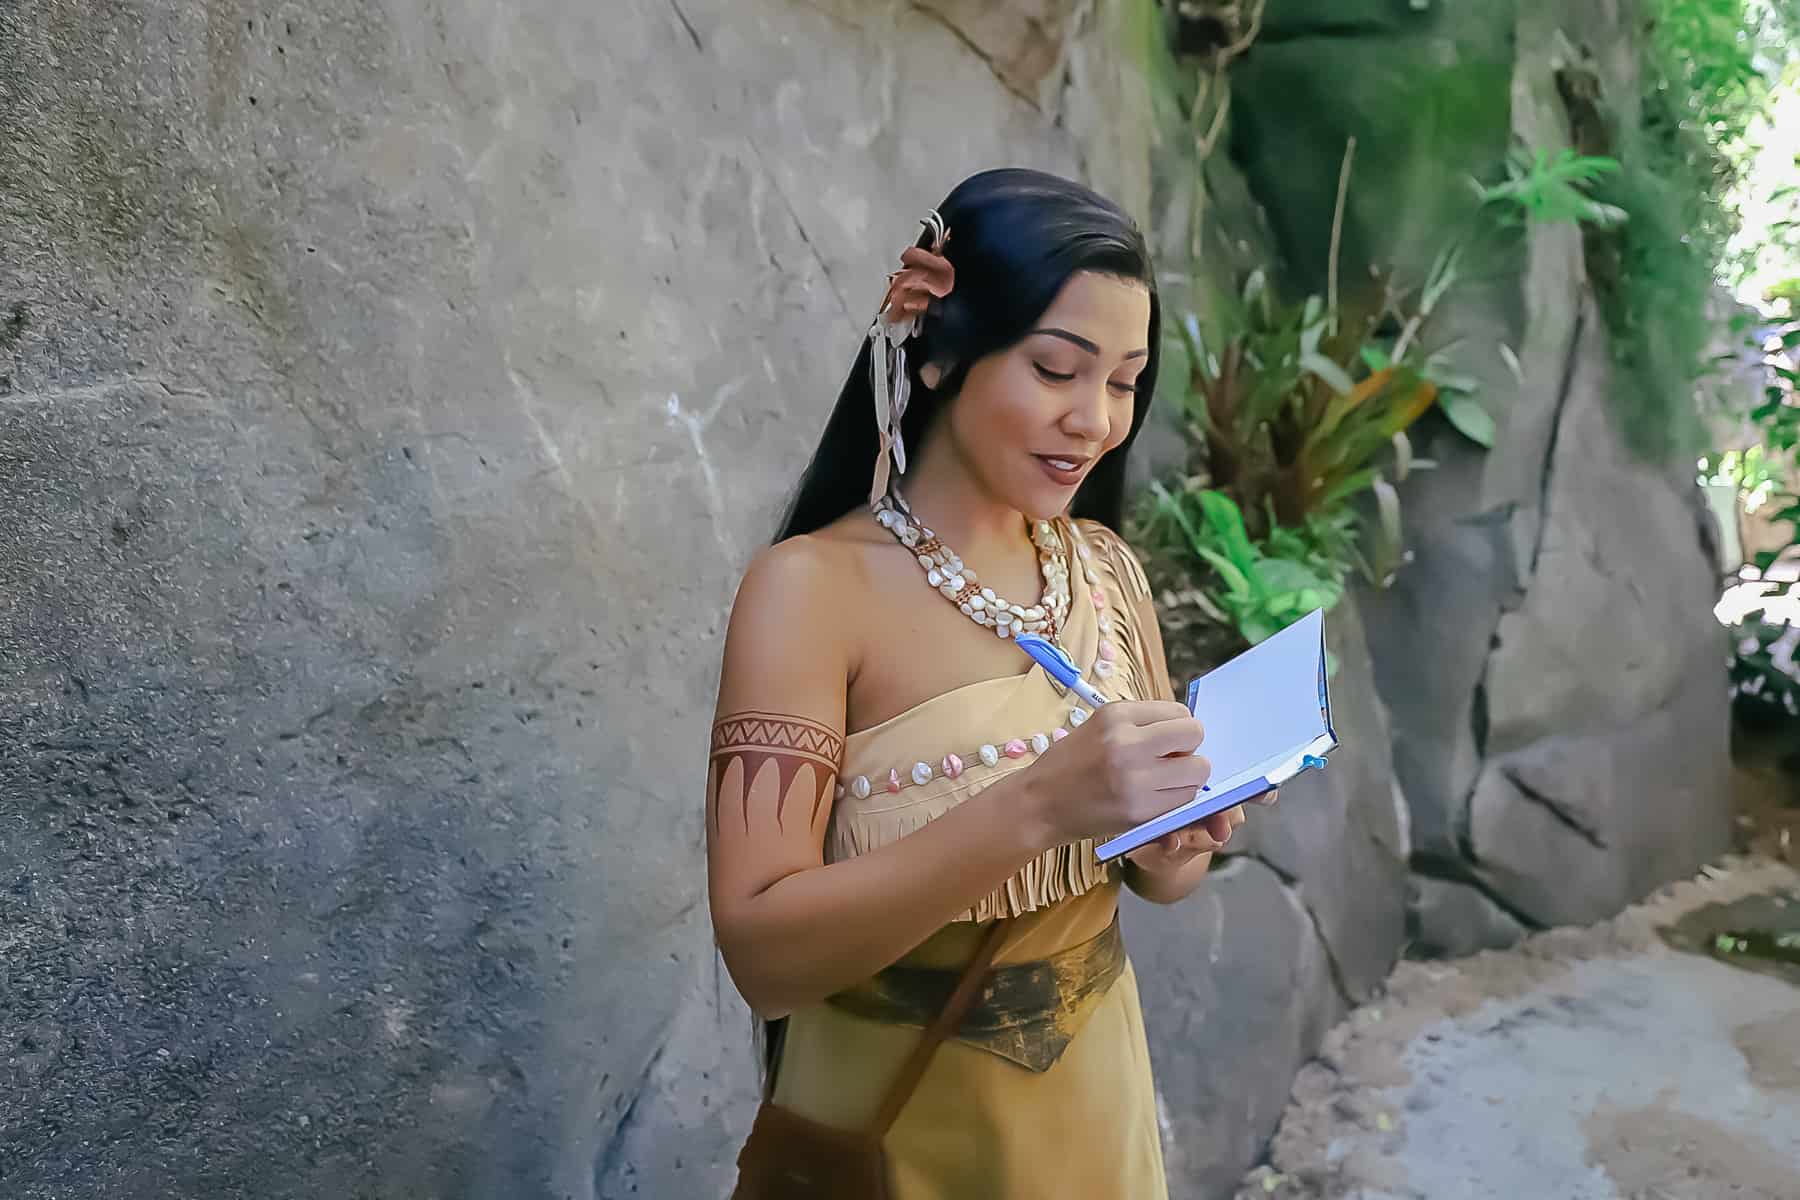 Pocahontas signing her autograph. 